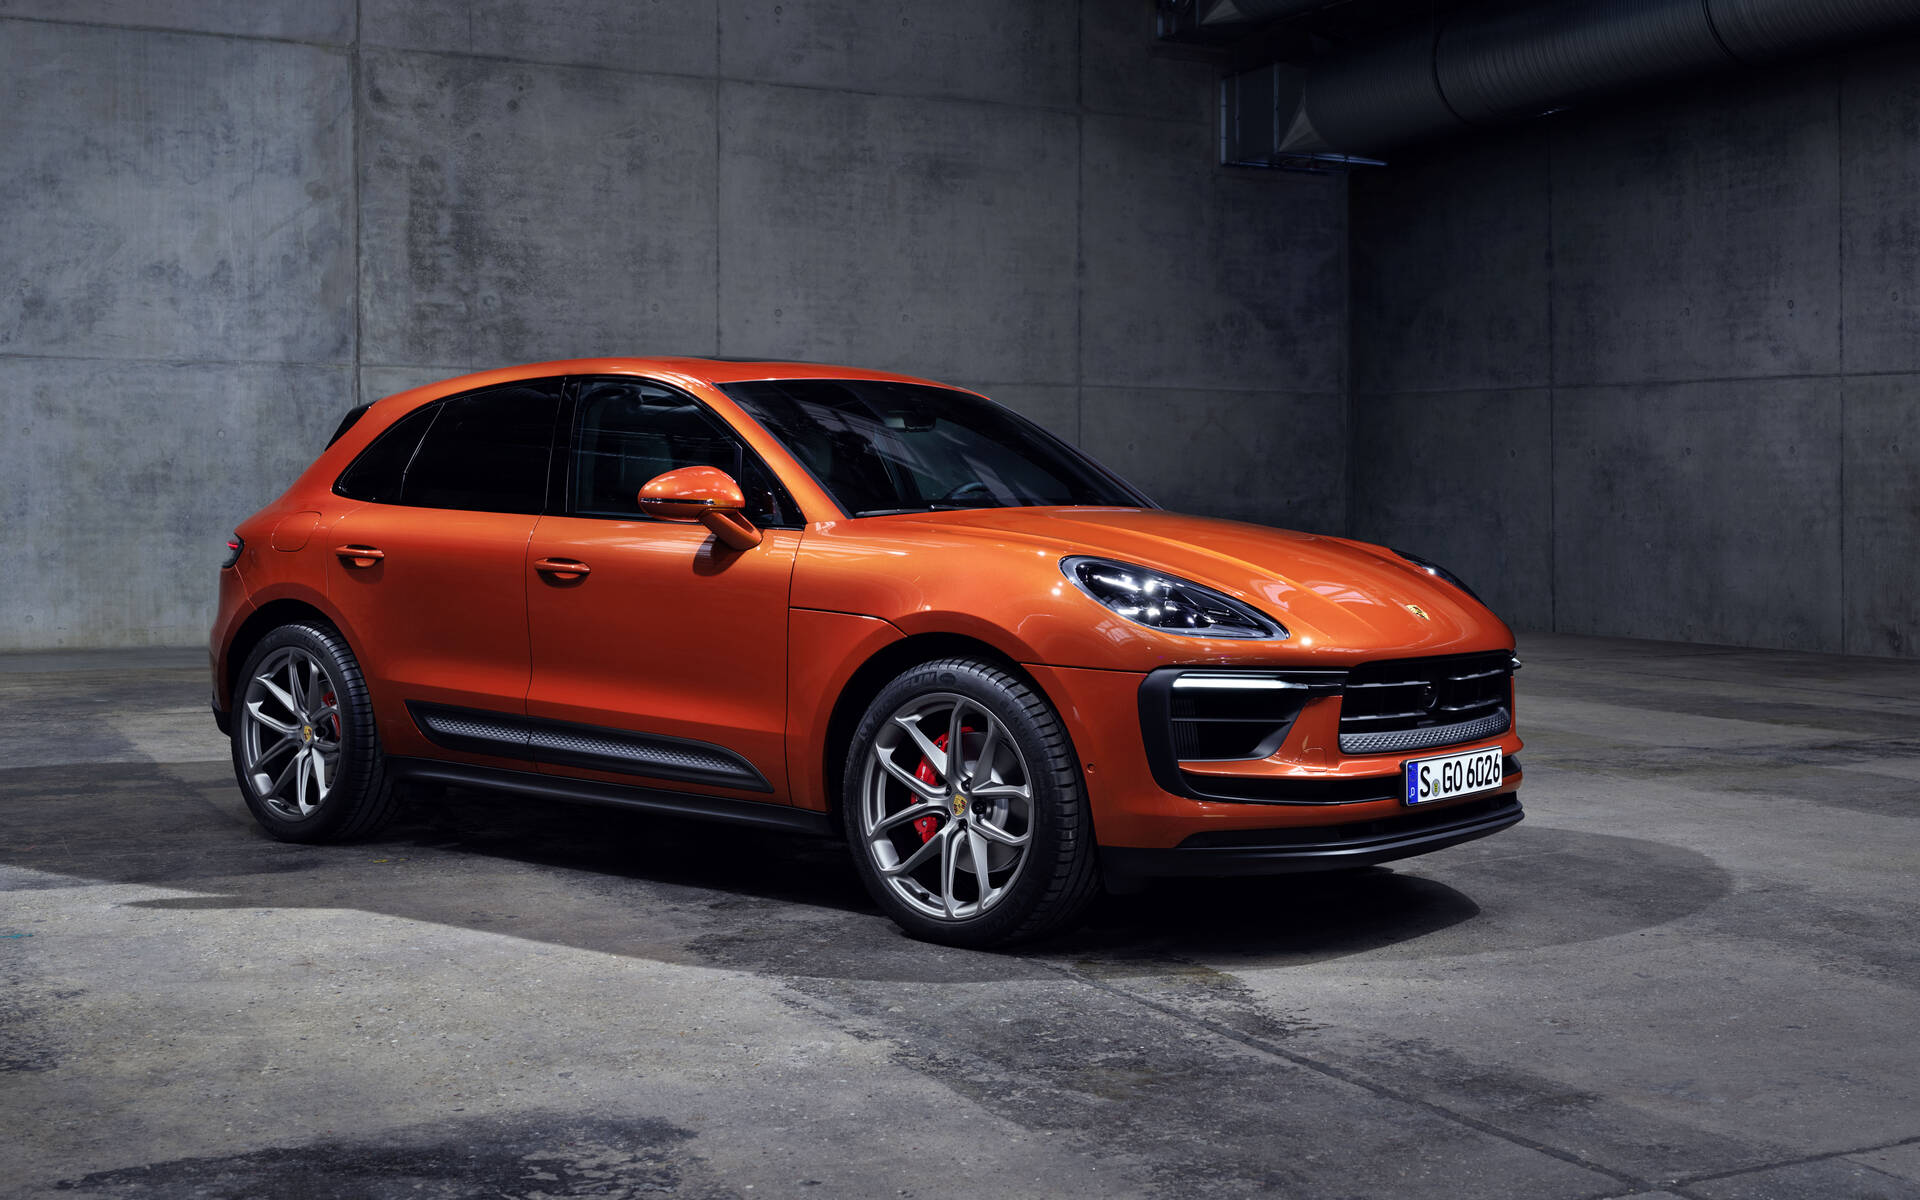 2022 Porsche Macan Goes Under the Knife, Flexes its Muscles - The Car Guide